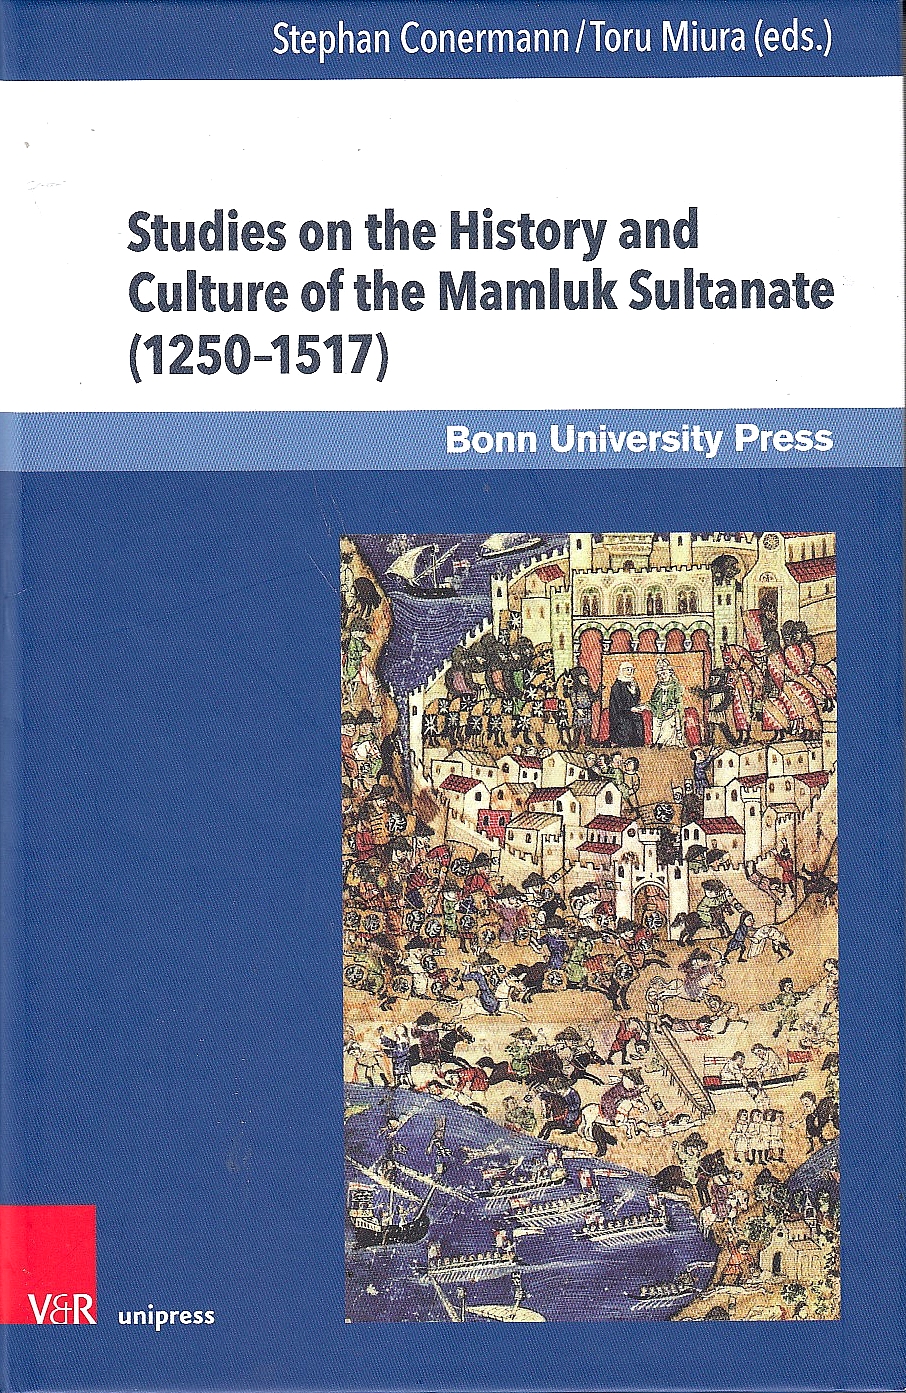 Studies on the History and Culture of the Mamluk Sultanate (1250-1517).